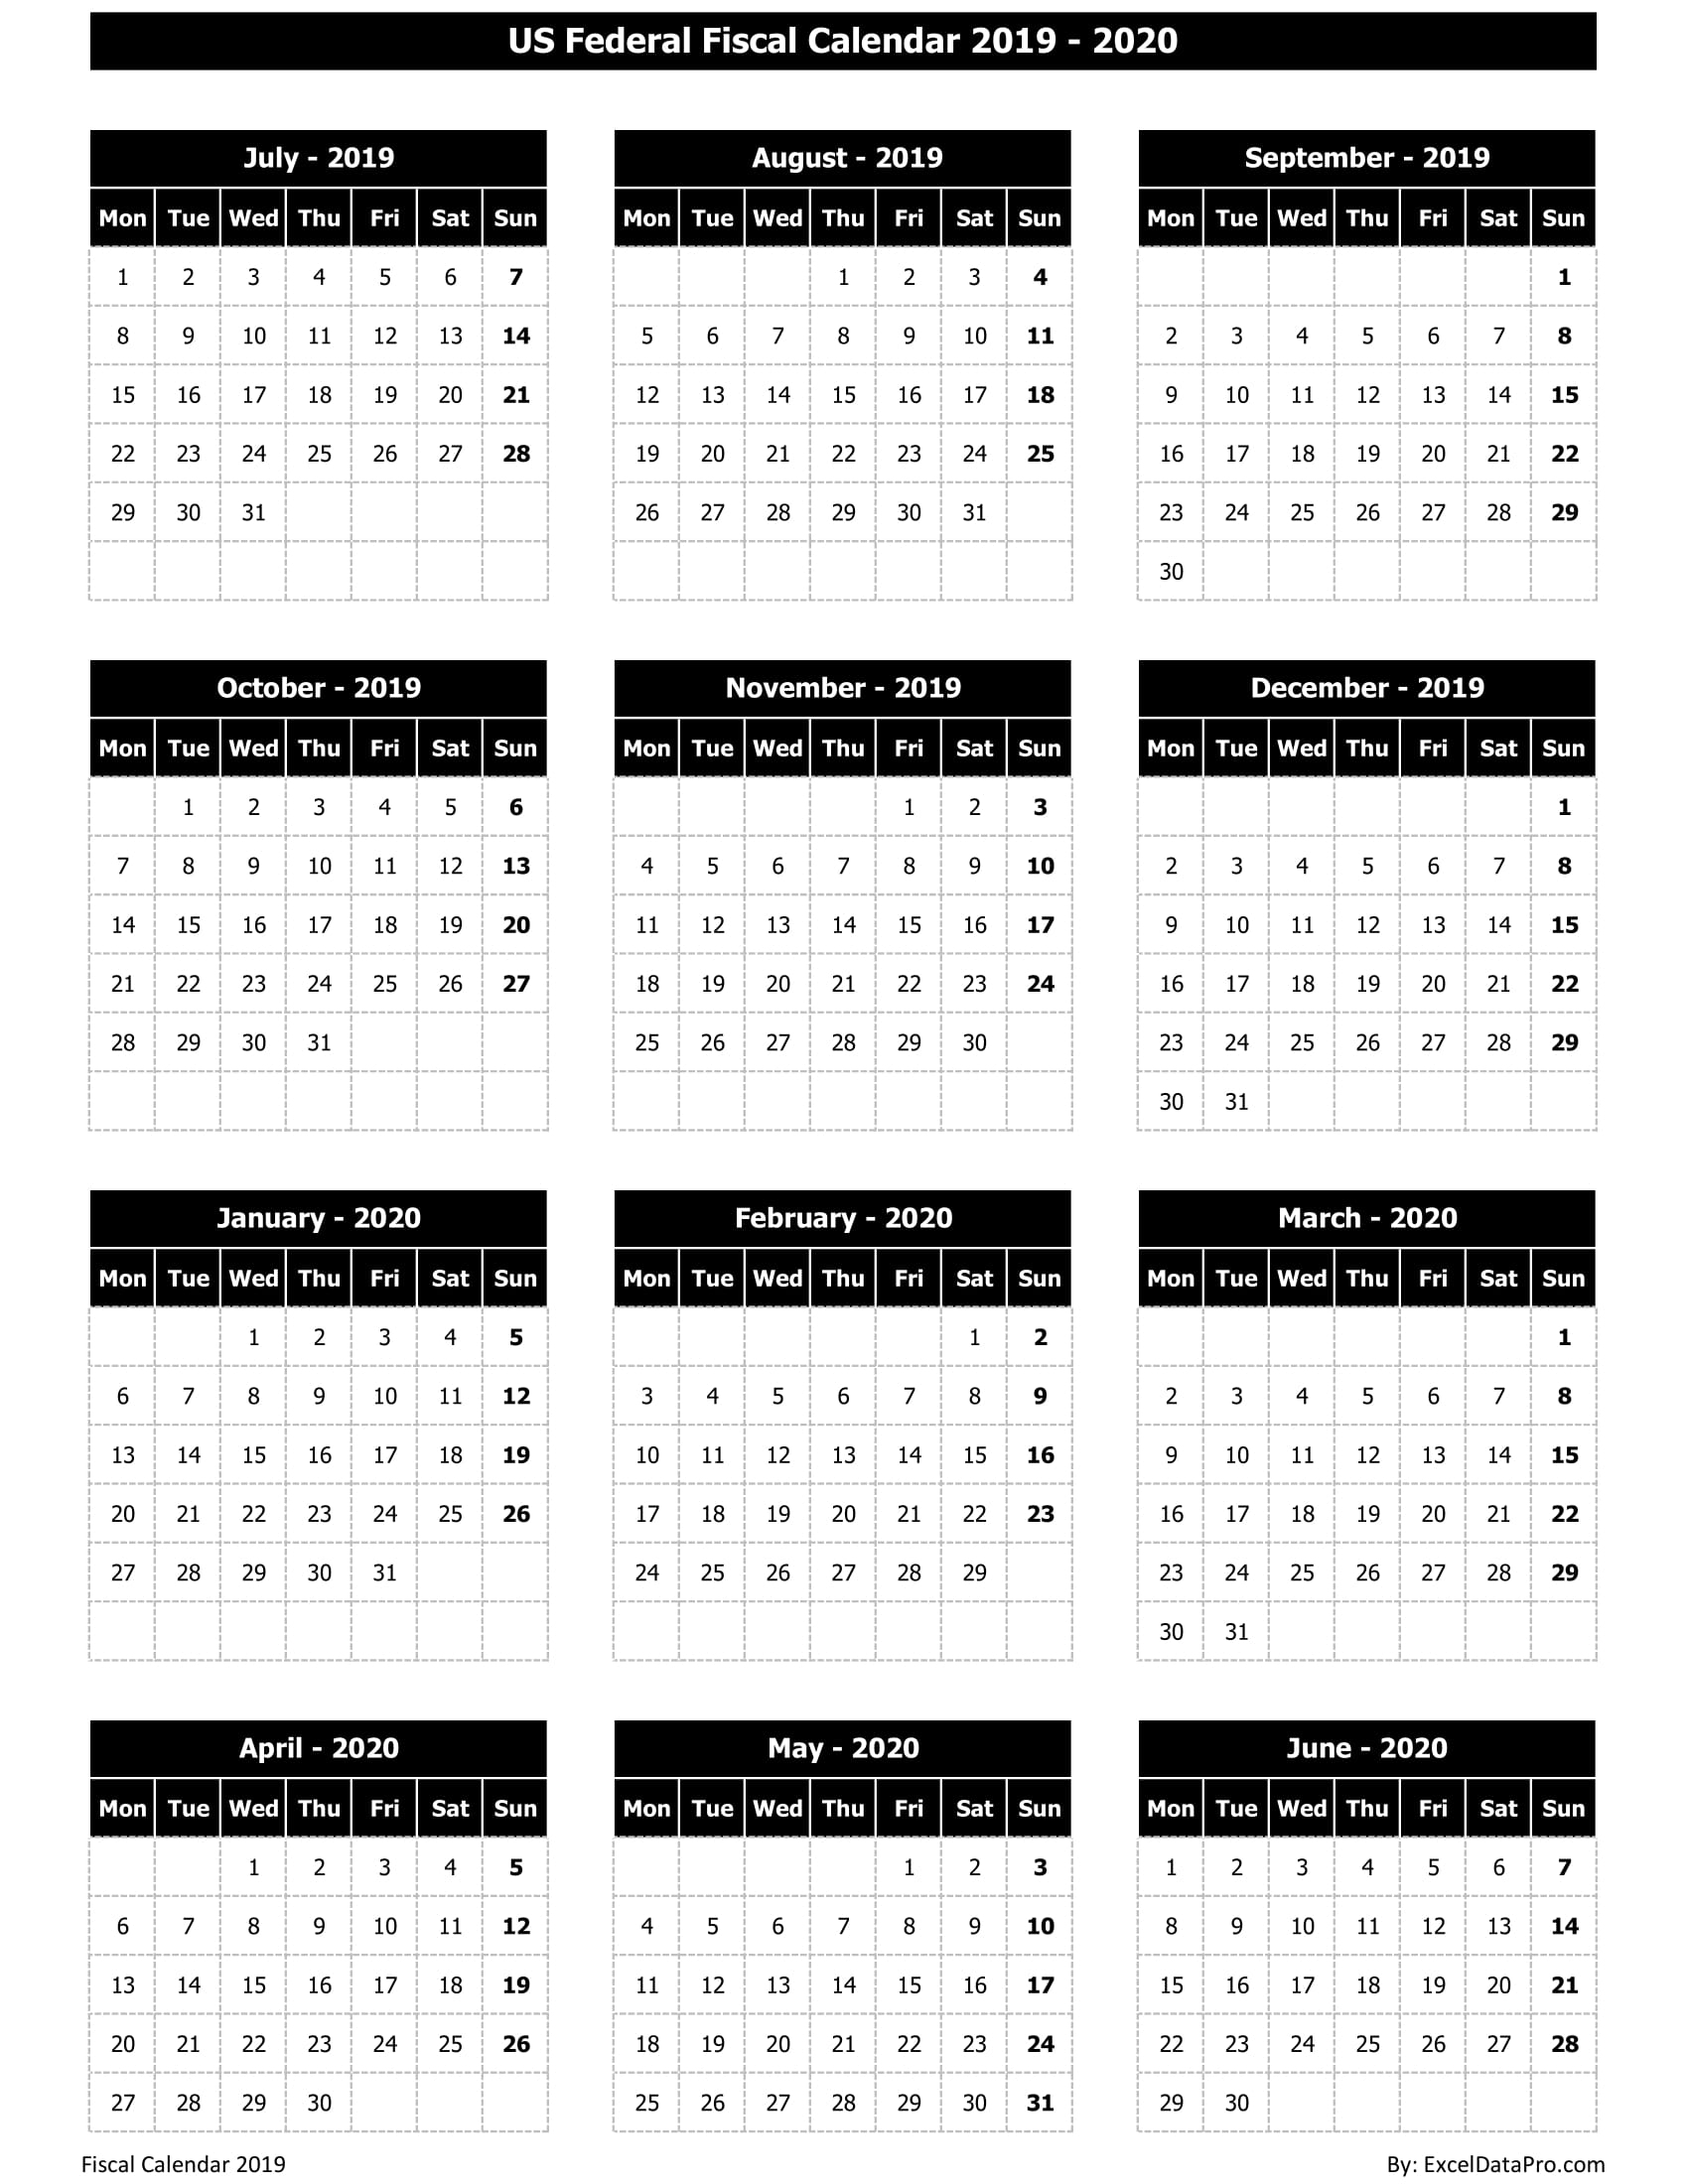 Download Us Federal Fiscal Calendar 2019-20 Excel Template